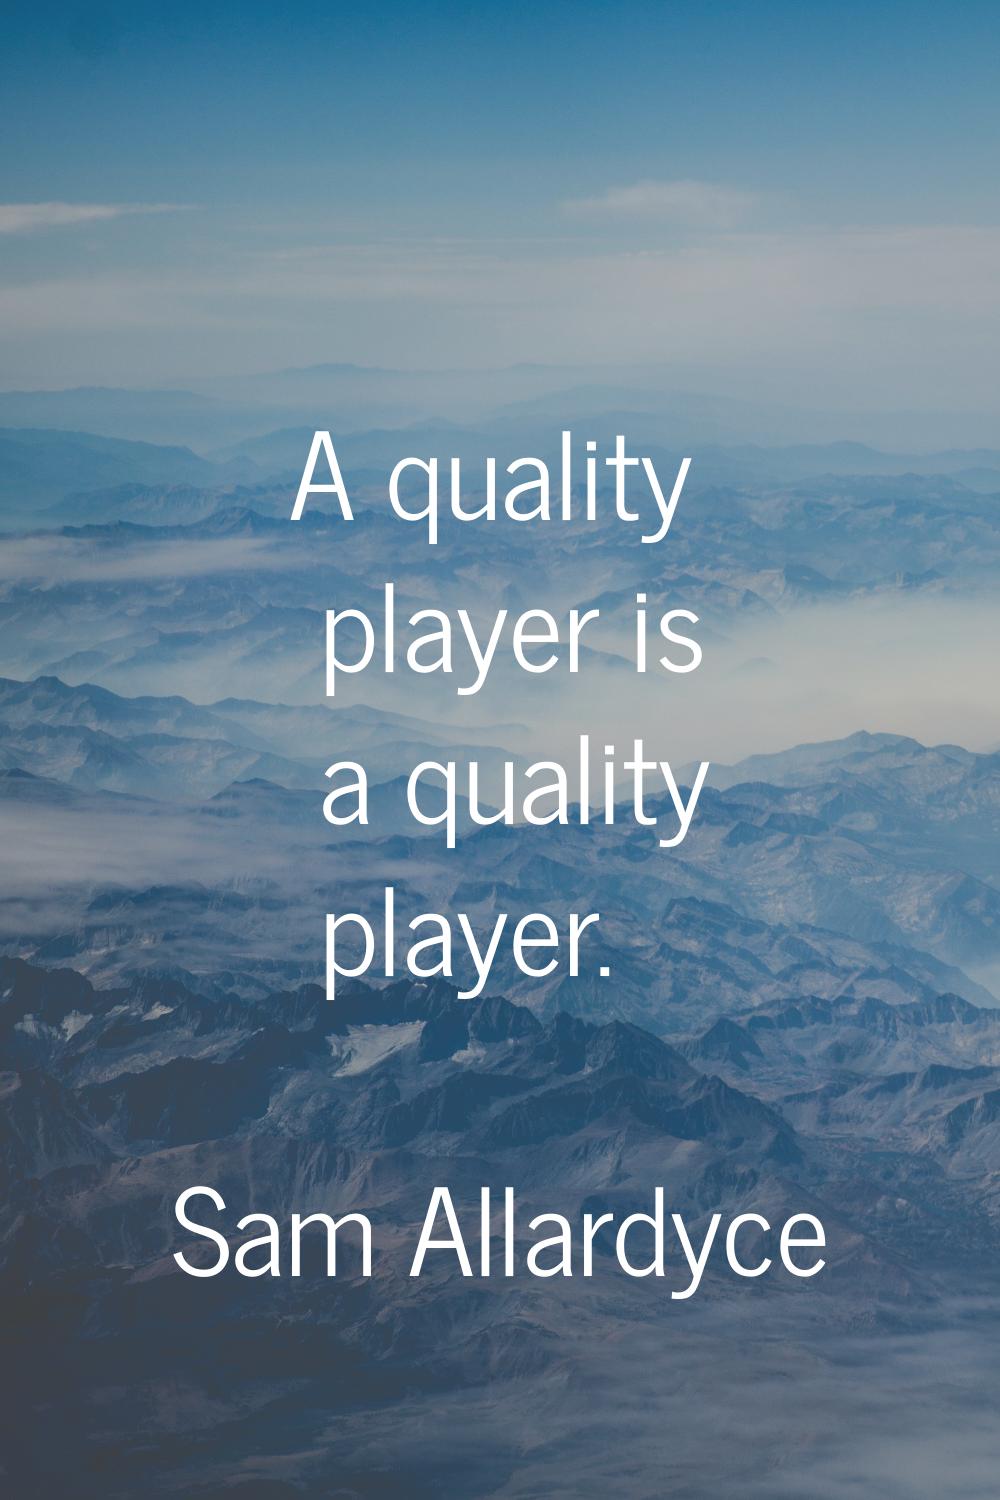 A quality player is a quality player.